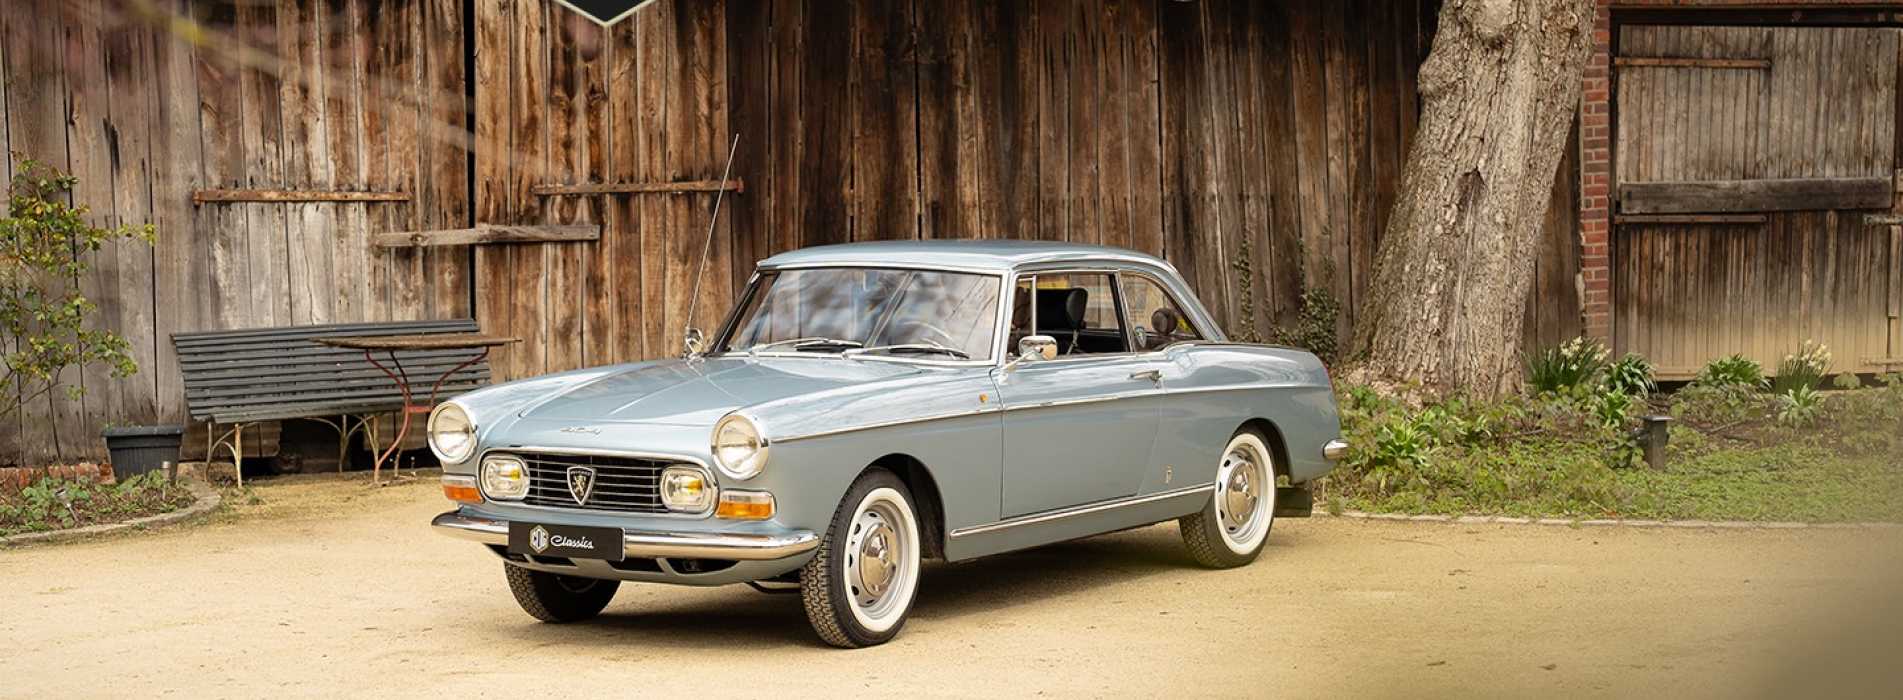 Peugeot 404 Coupe 2